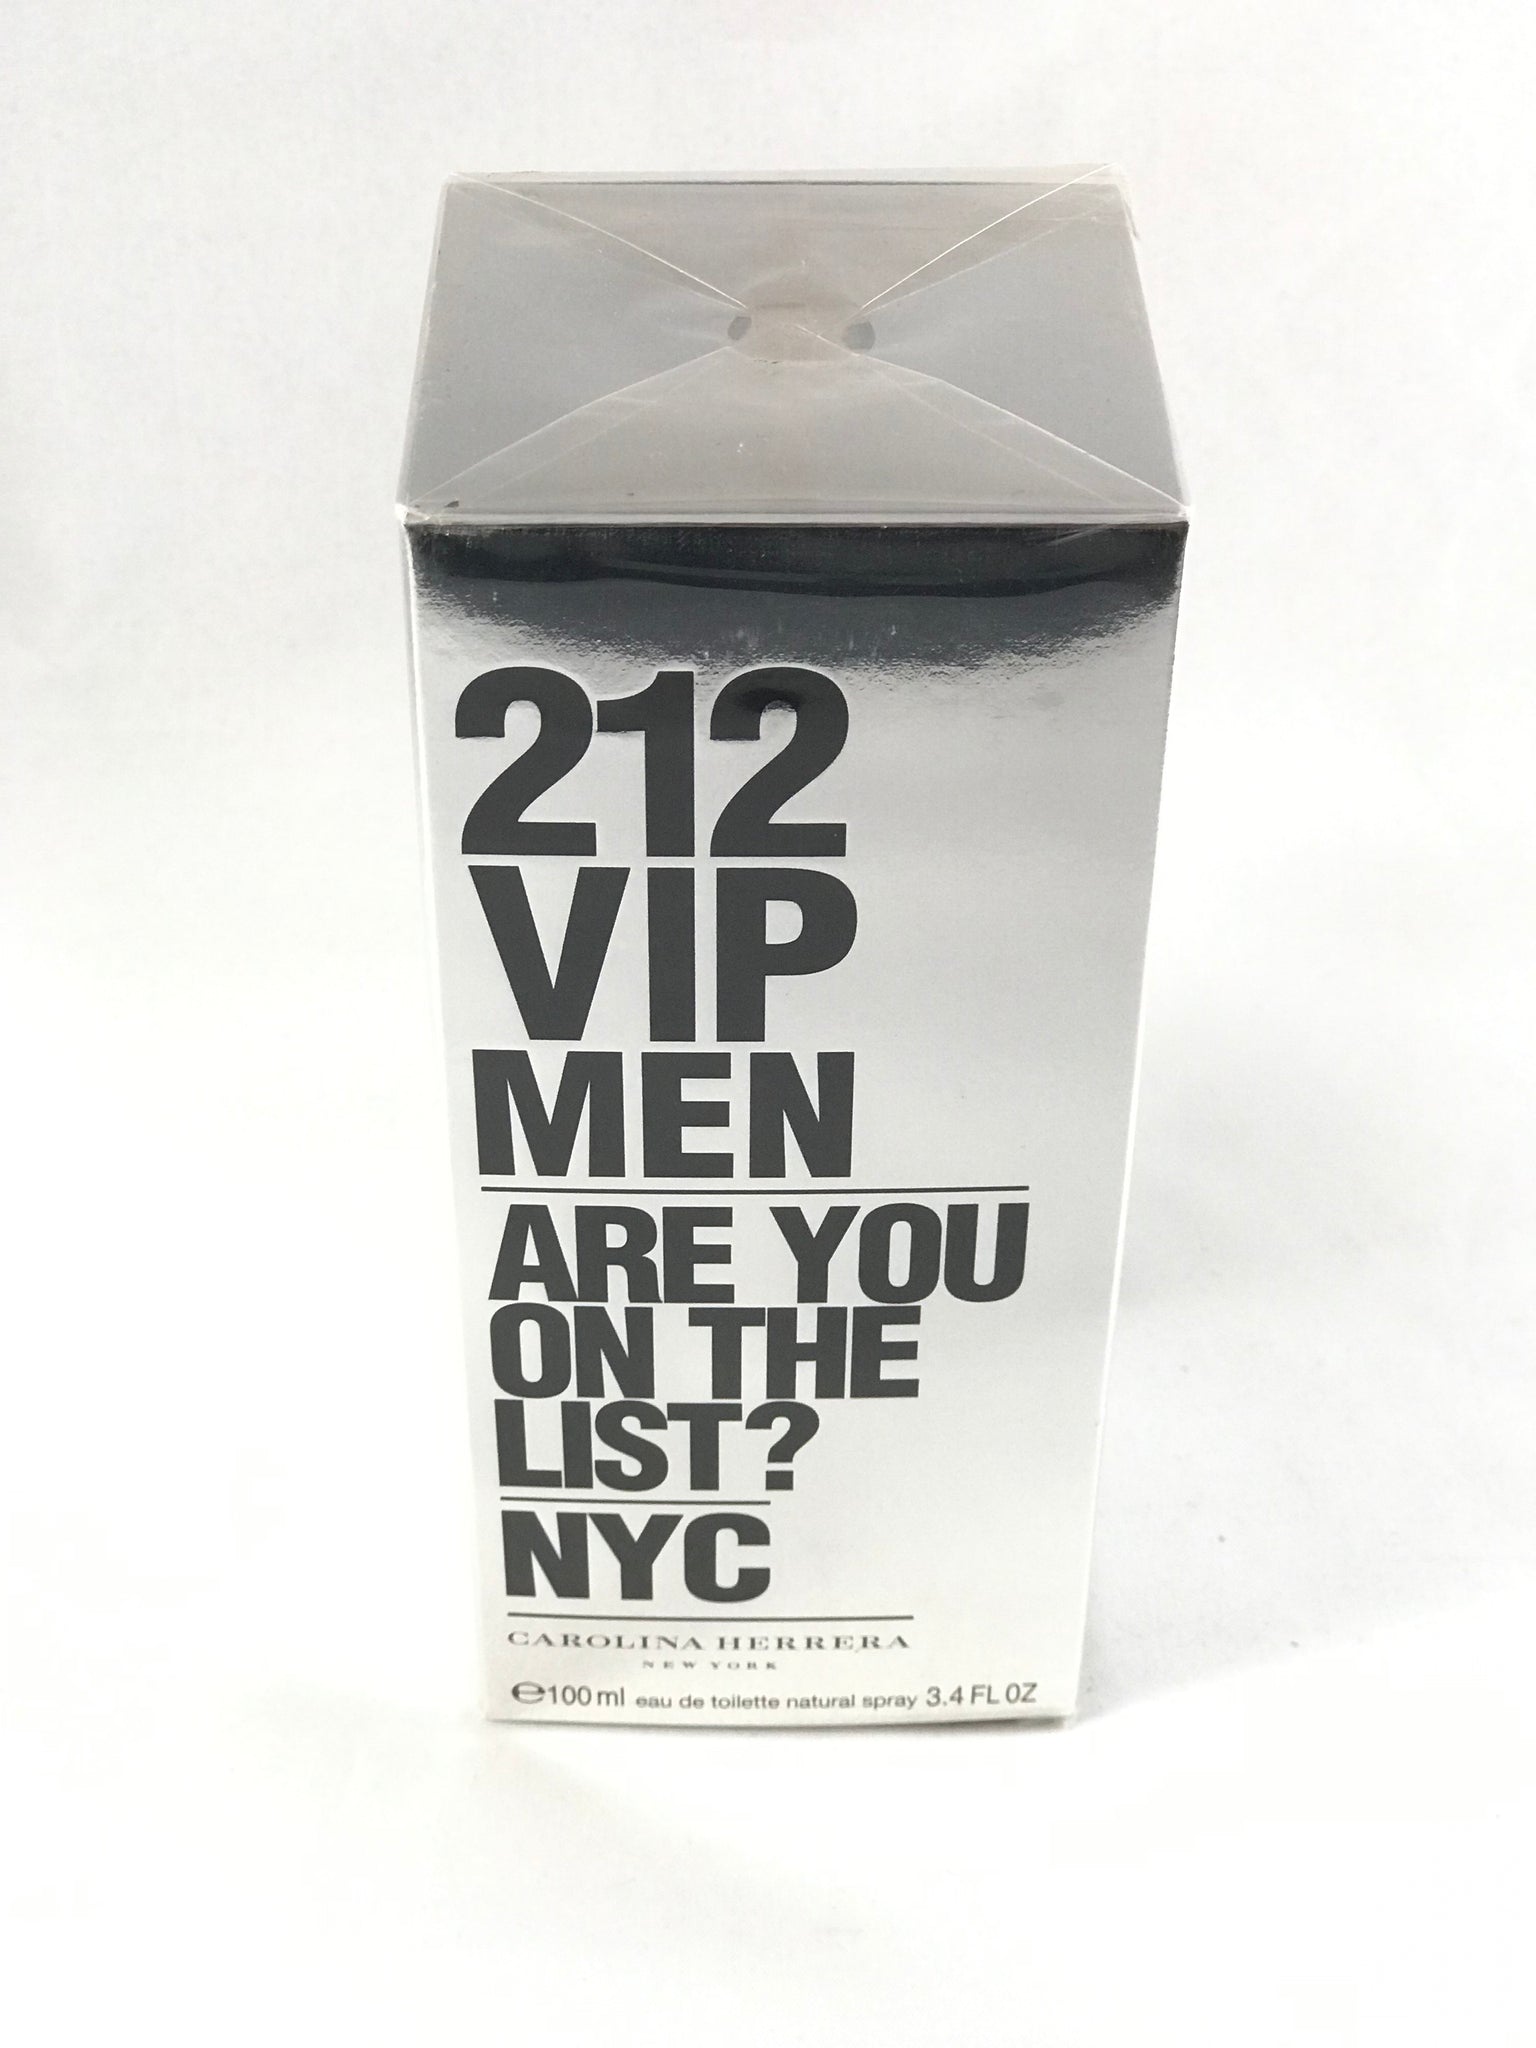 212 vip men are nyc Herrera EDT gifts you always special Carolina – on perfumes 3.4oz the & ? list